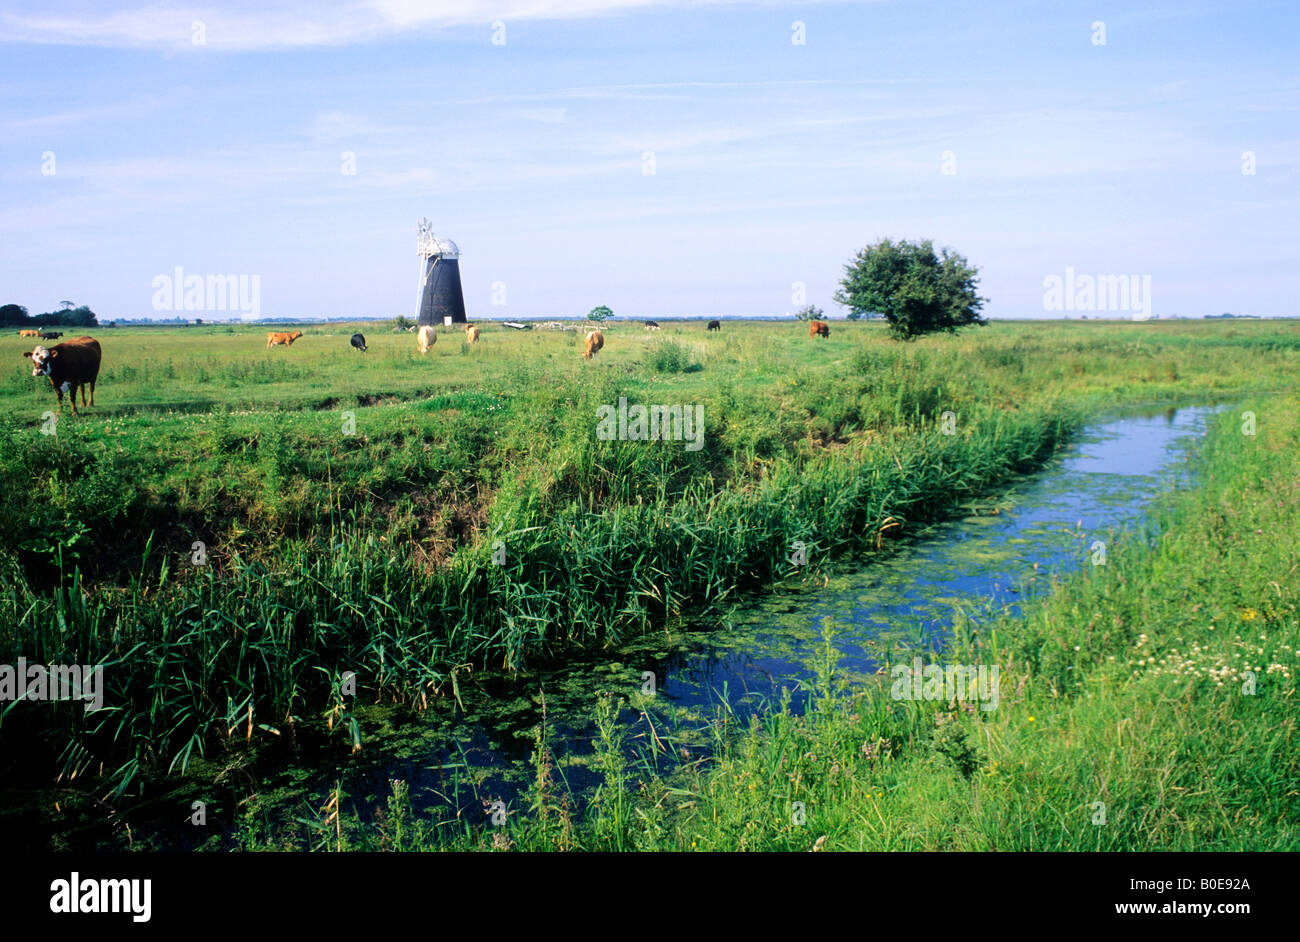 Halvergate Marshes Norfolk Broads windmill cattle reed beds marshland grazing pump flat English scenery landscape RSPB reed beds Stock Photo